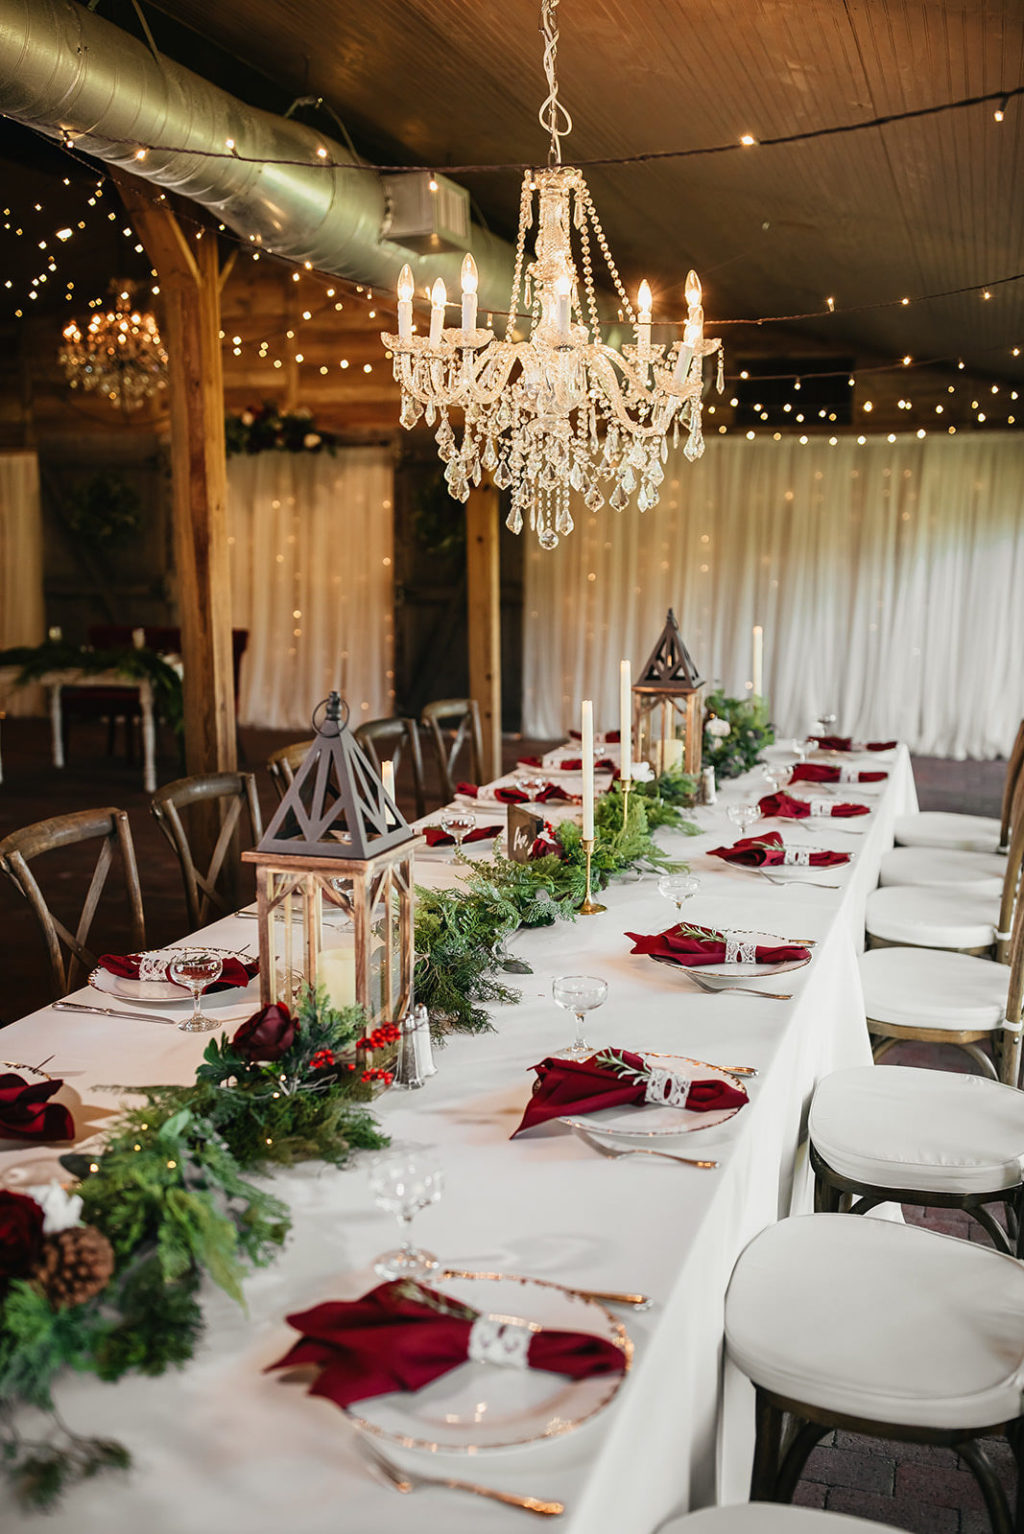 Rustic Country Fall Winter Barn Wedding | Greenery Garland Red Roses White Lanterns | Wood Cross Back Chairs | Gold Chargers and String Lights | Christmas Inspired Wedding Decor